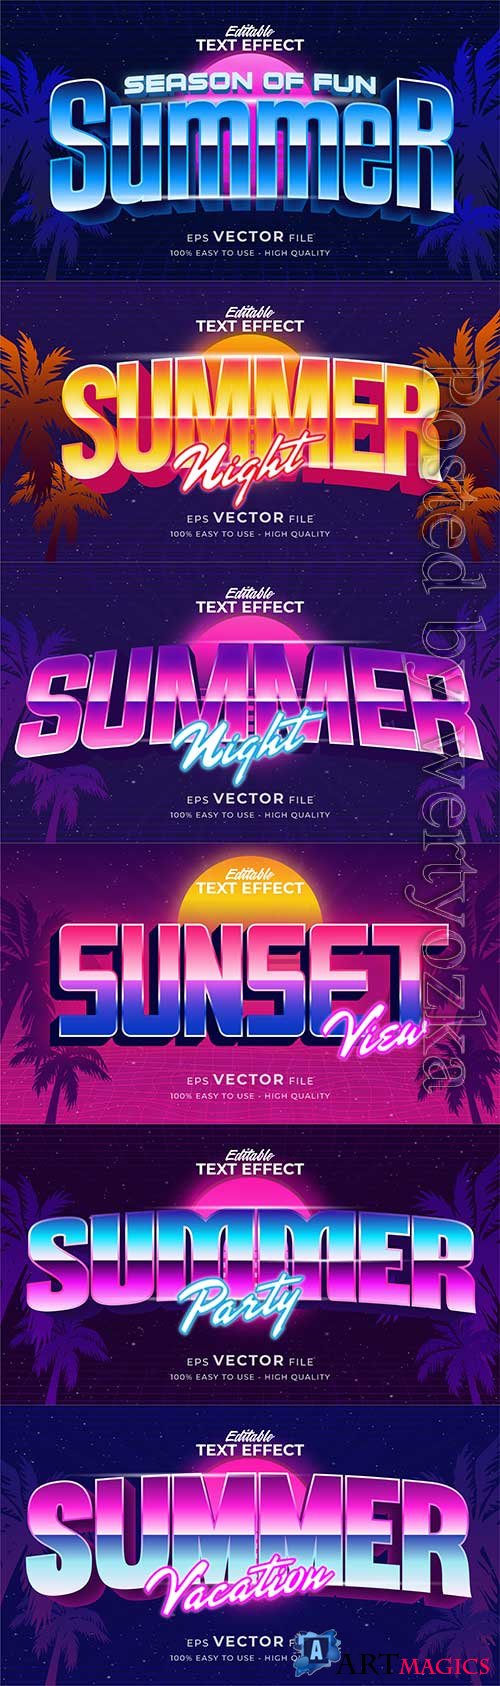 Retro summer holiday text in grunge style theme in vector vol 11